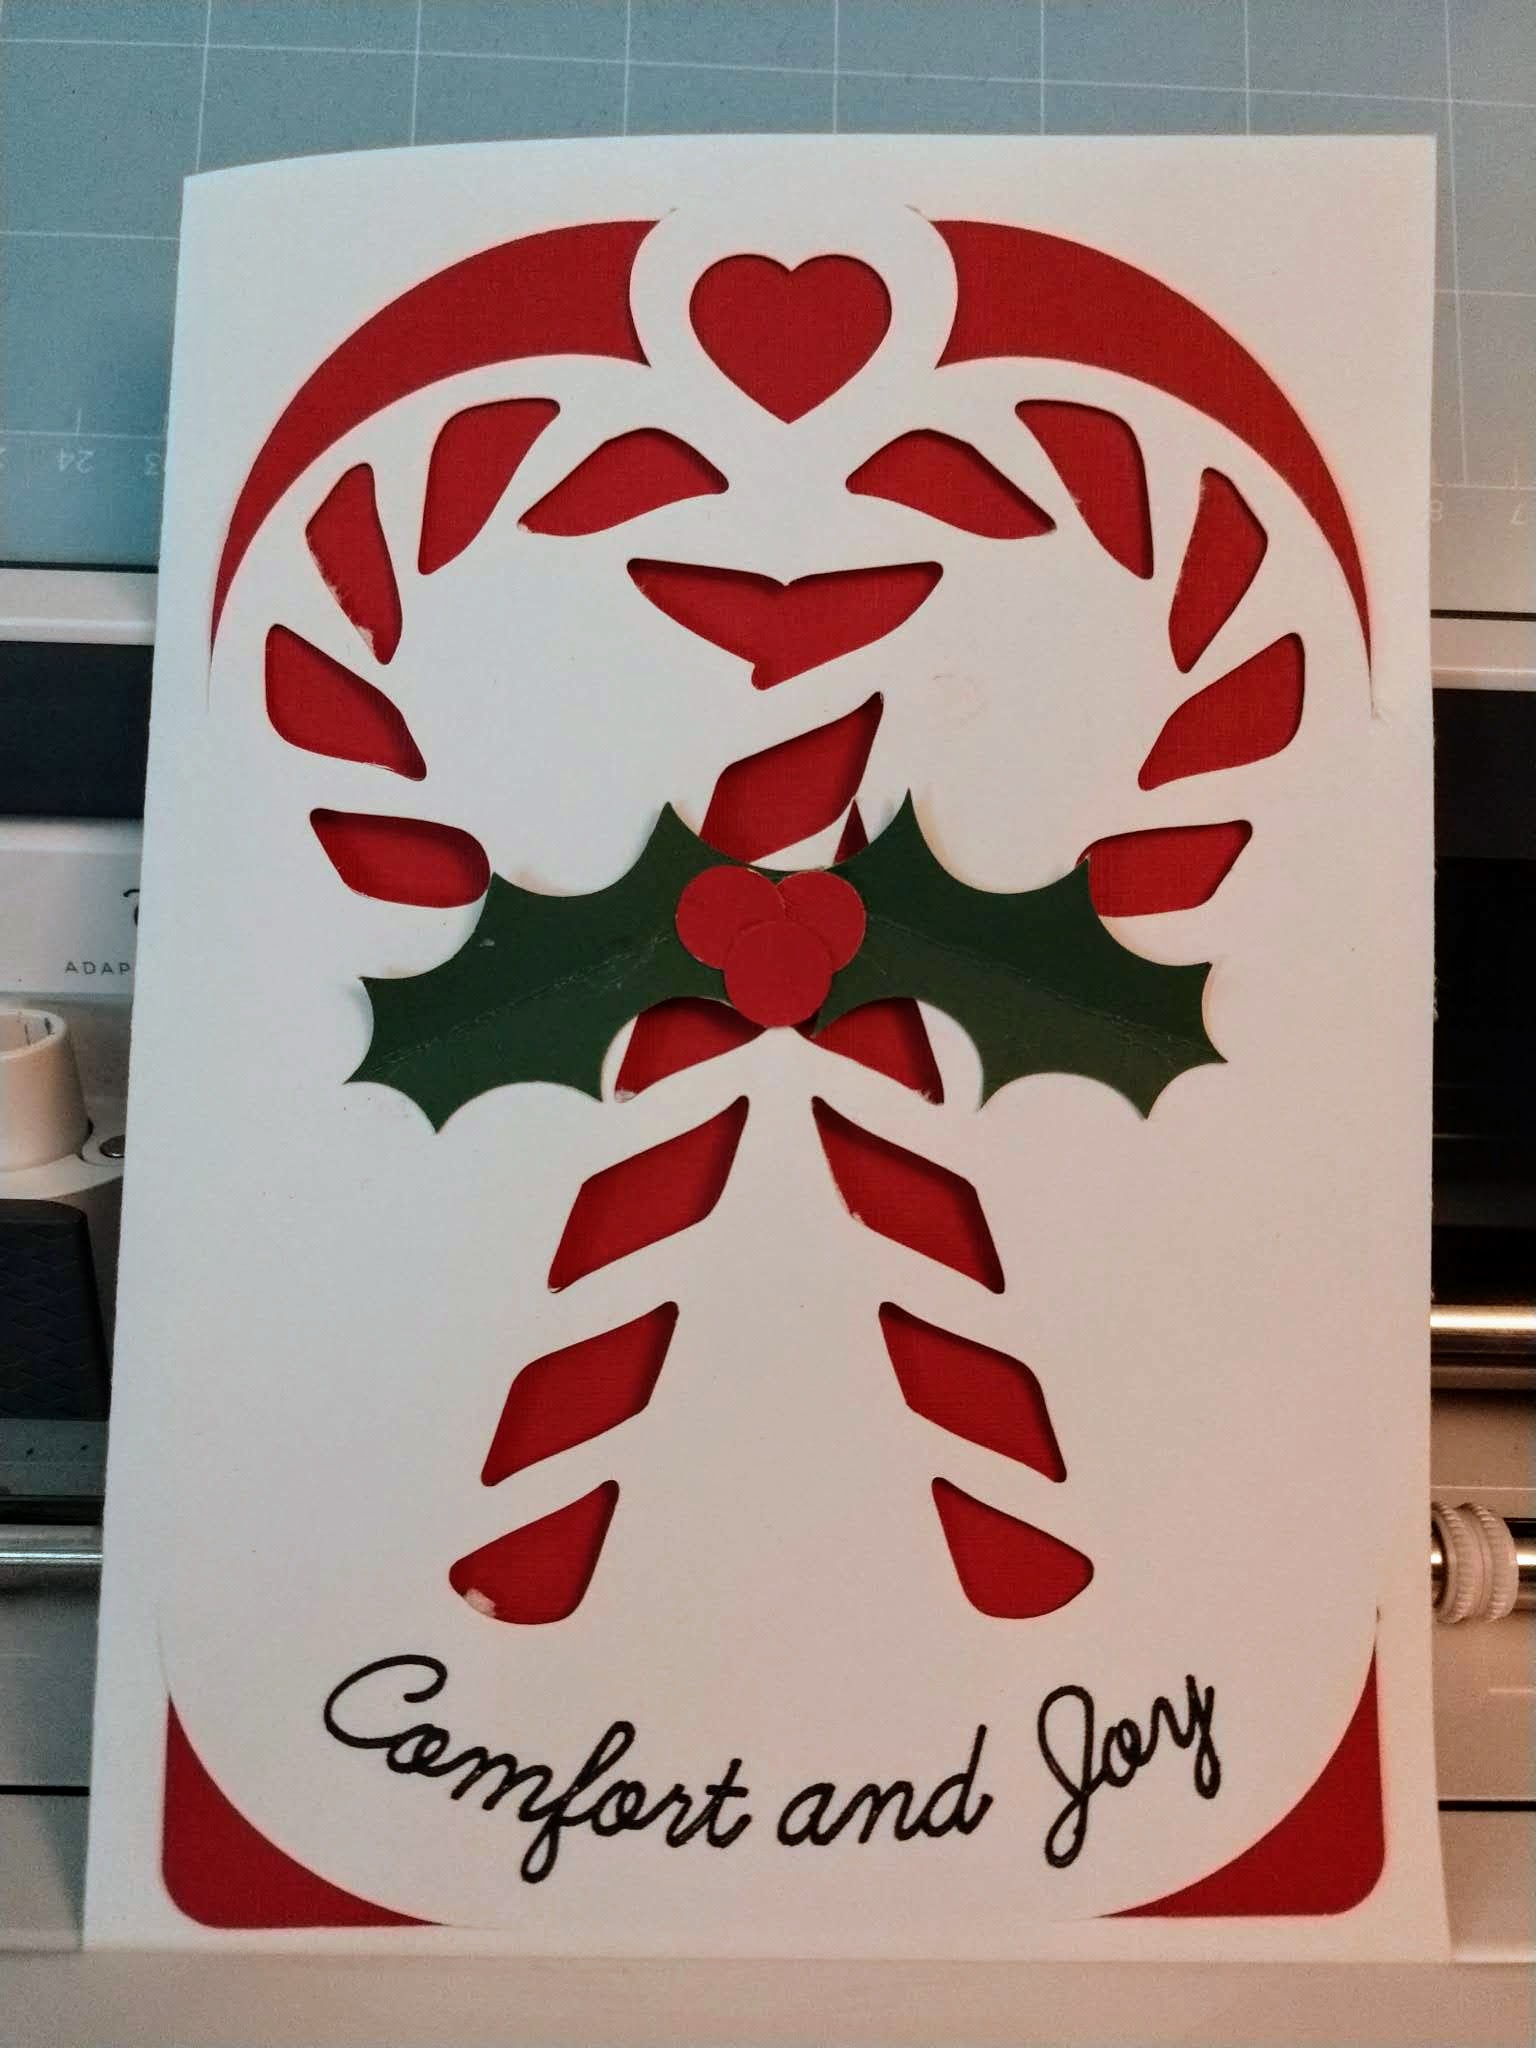 Two crossed candy canes with a sprig of holly in the center